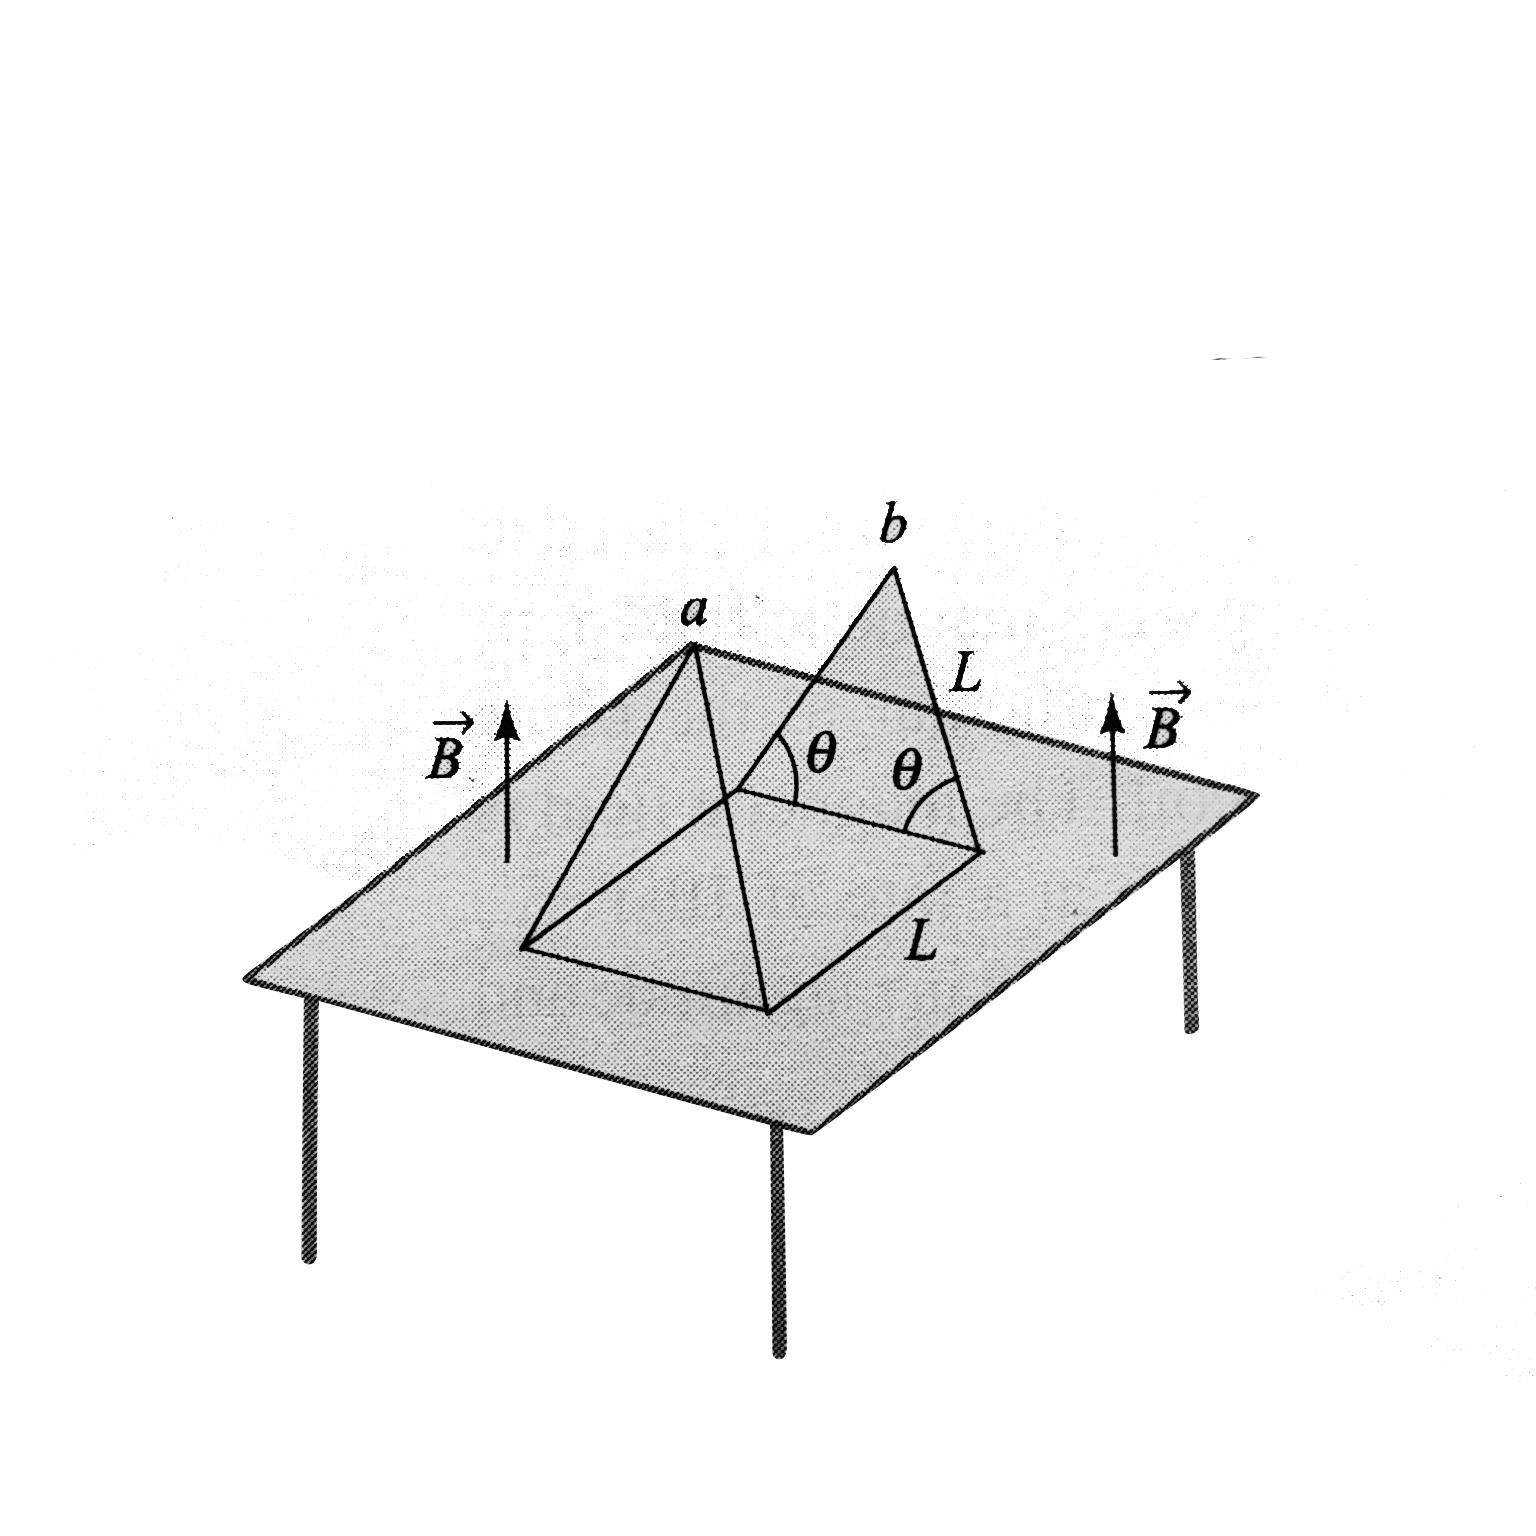 The wire shown in  is bent in the shape of a tent, with theta = 60.0^(@) and L = 1.50 m, and placed in a uniform magnetic field of magnitude 0.300 T perpendicular to the tabletop. The wire is rigid but hinged at points a and b. If the tent is flattened out on the table in 0.100 s, what is the average induced emf in the wire during this time?